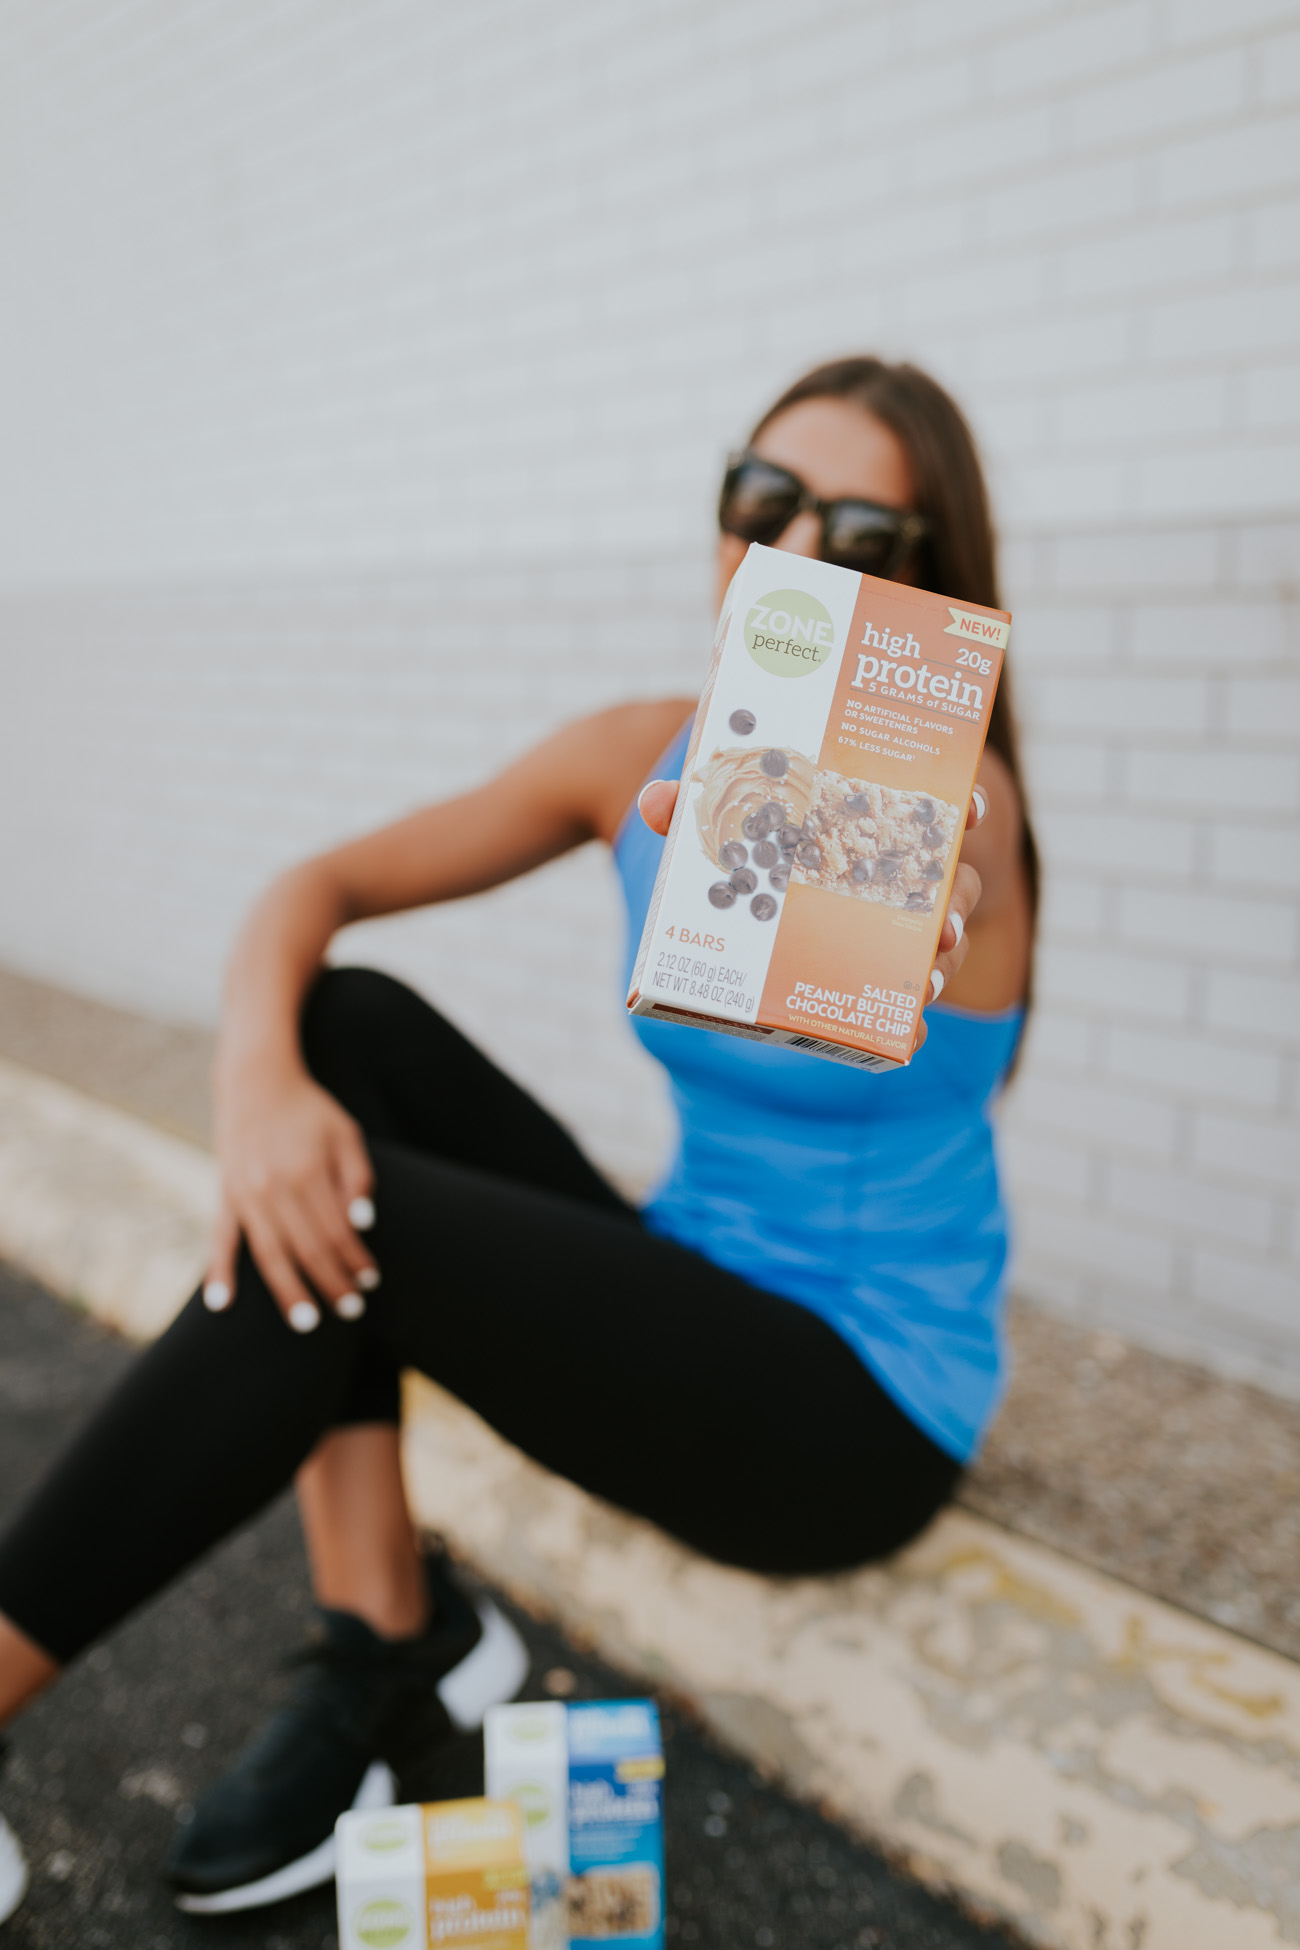 zone perfect high protein bars, high protein snack, fave protein snack, fave protein bars, tasty protein bars, activewear, a southern drawl nutrition, a southern drawl fitness, fitwithasd // grace wainwright